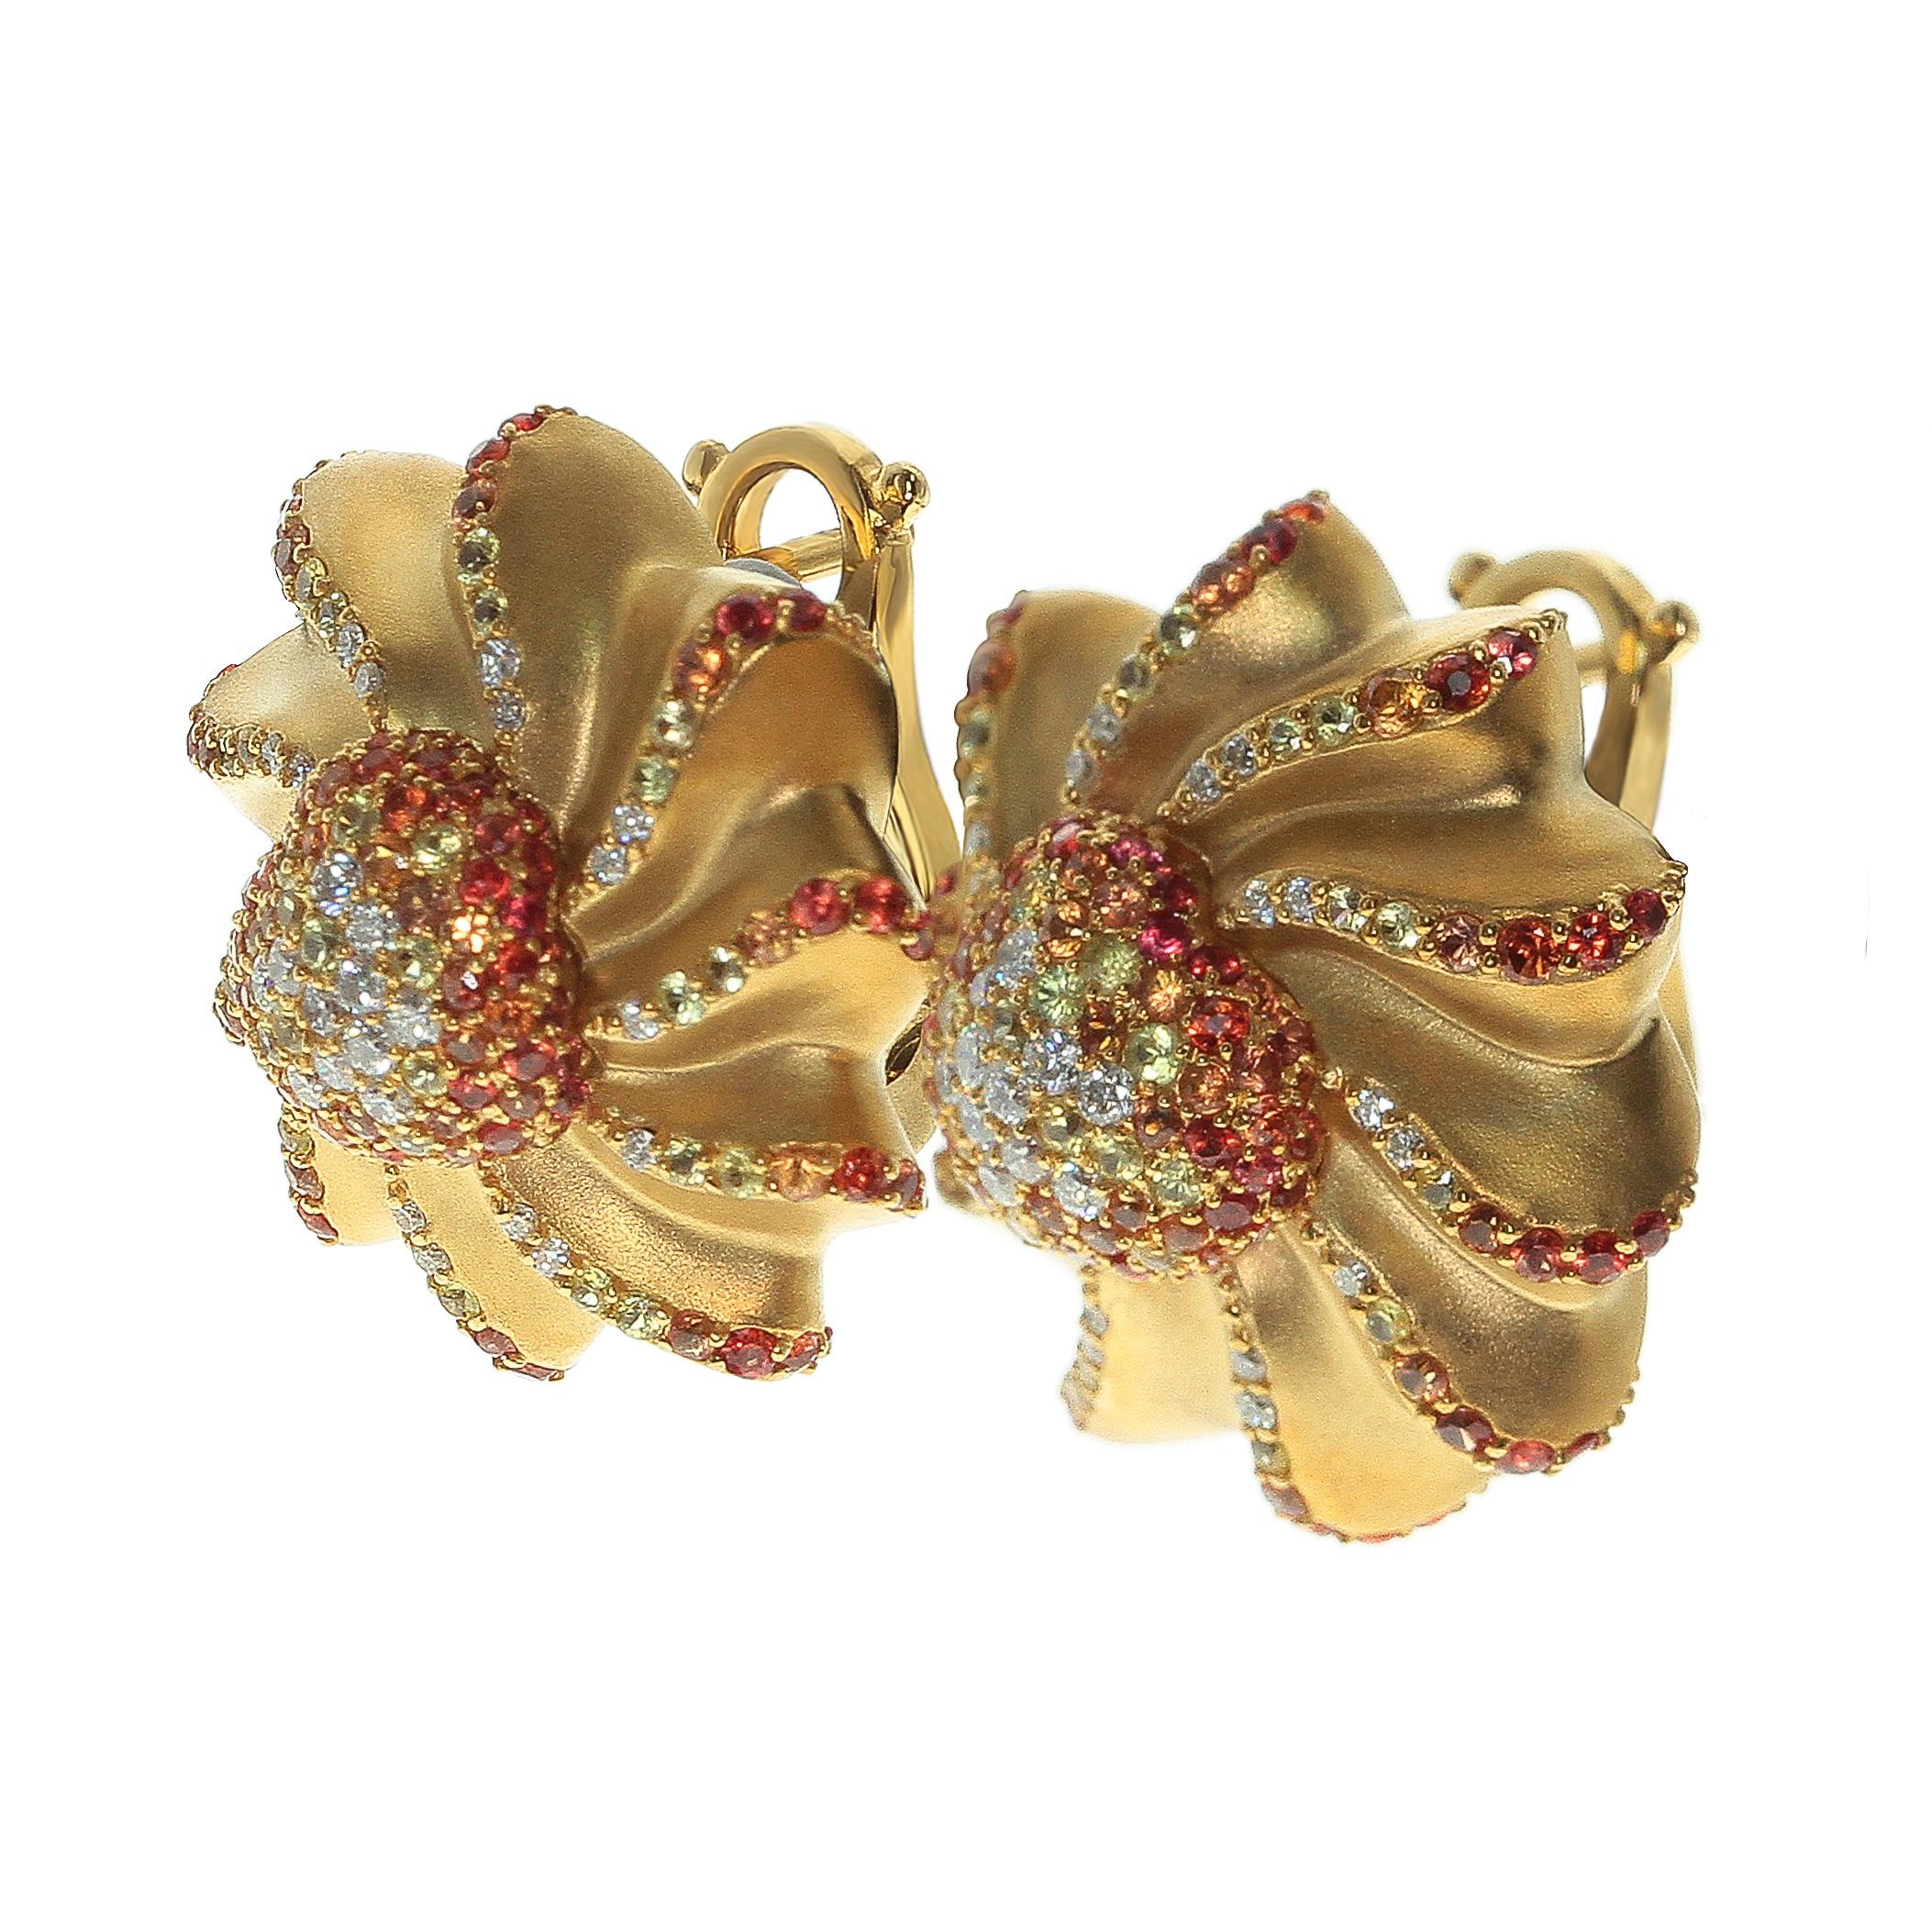 Diamond Yellow Sapphire Orange Sapphire 18 Karat Yellow Gold Cookie Earrings

From our Sweet Collection - for your Sweetheart
Dive in to kids memories, where you can eat this cookies every day.

Accompanied with the Ring LU116414769651 and Brooch